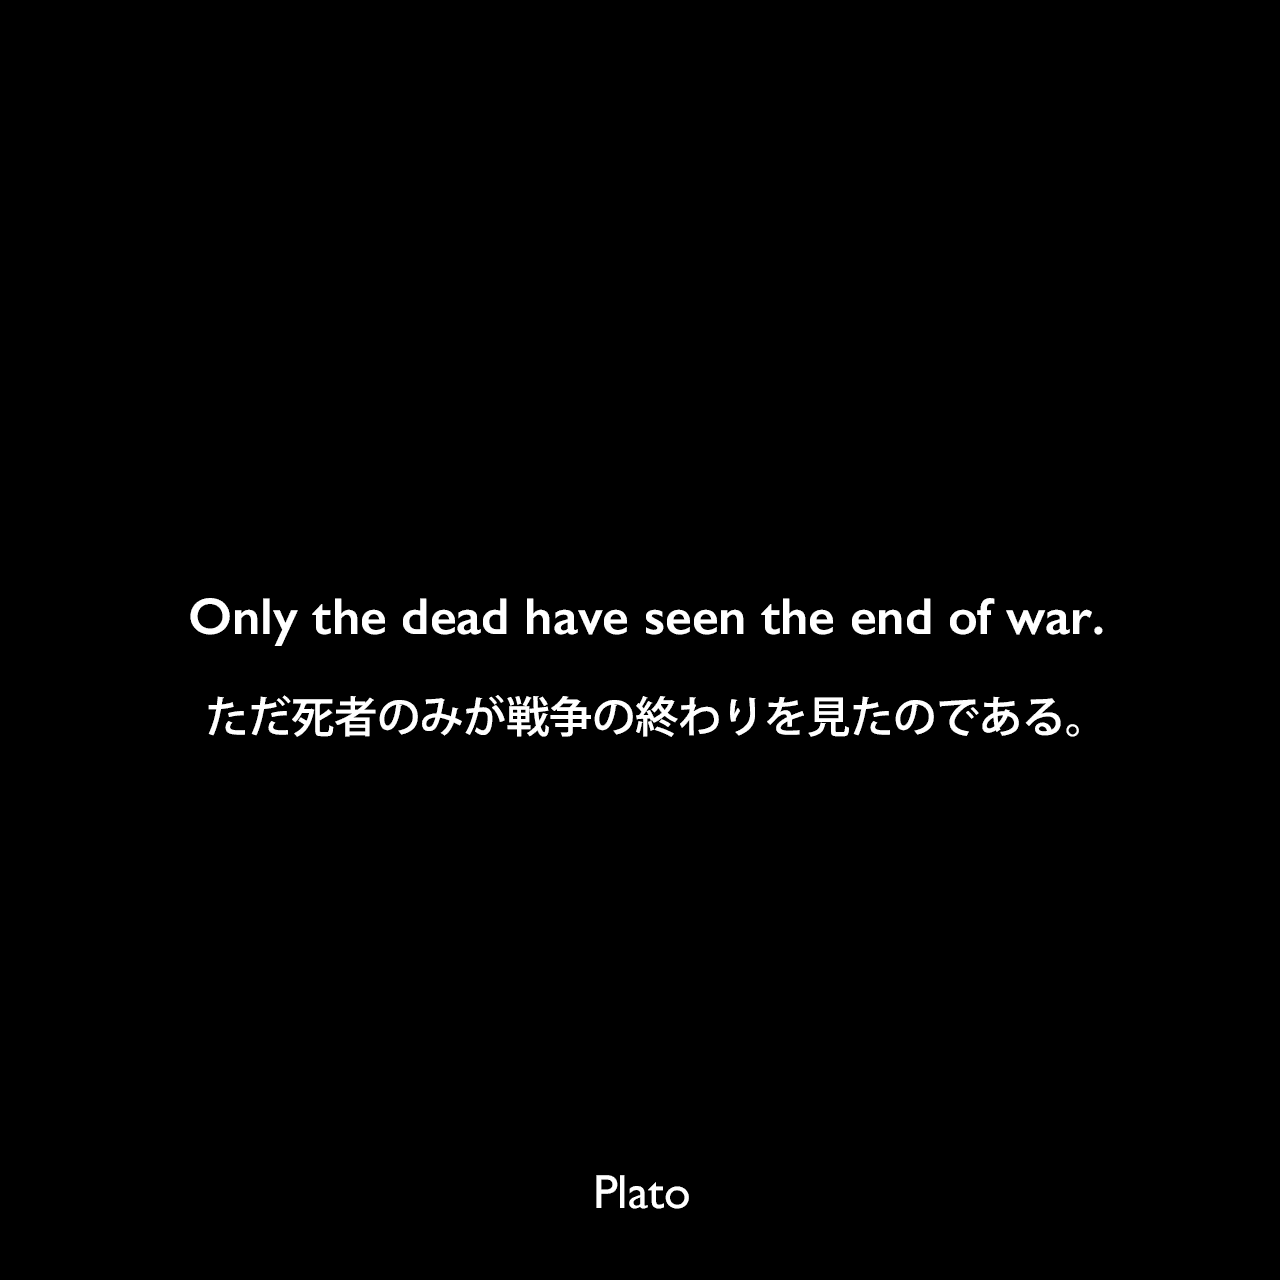 Only the dead have seen the end of war.ただ死者のみが戦争の終わりを見たのである。Plato